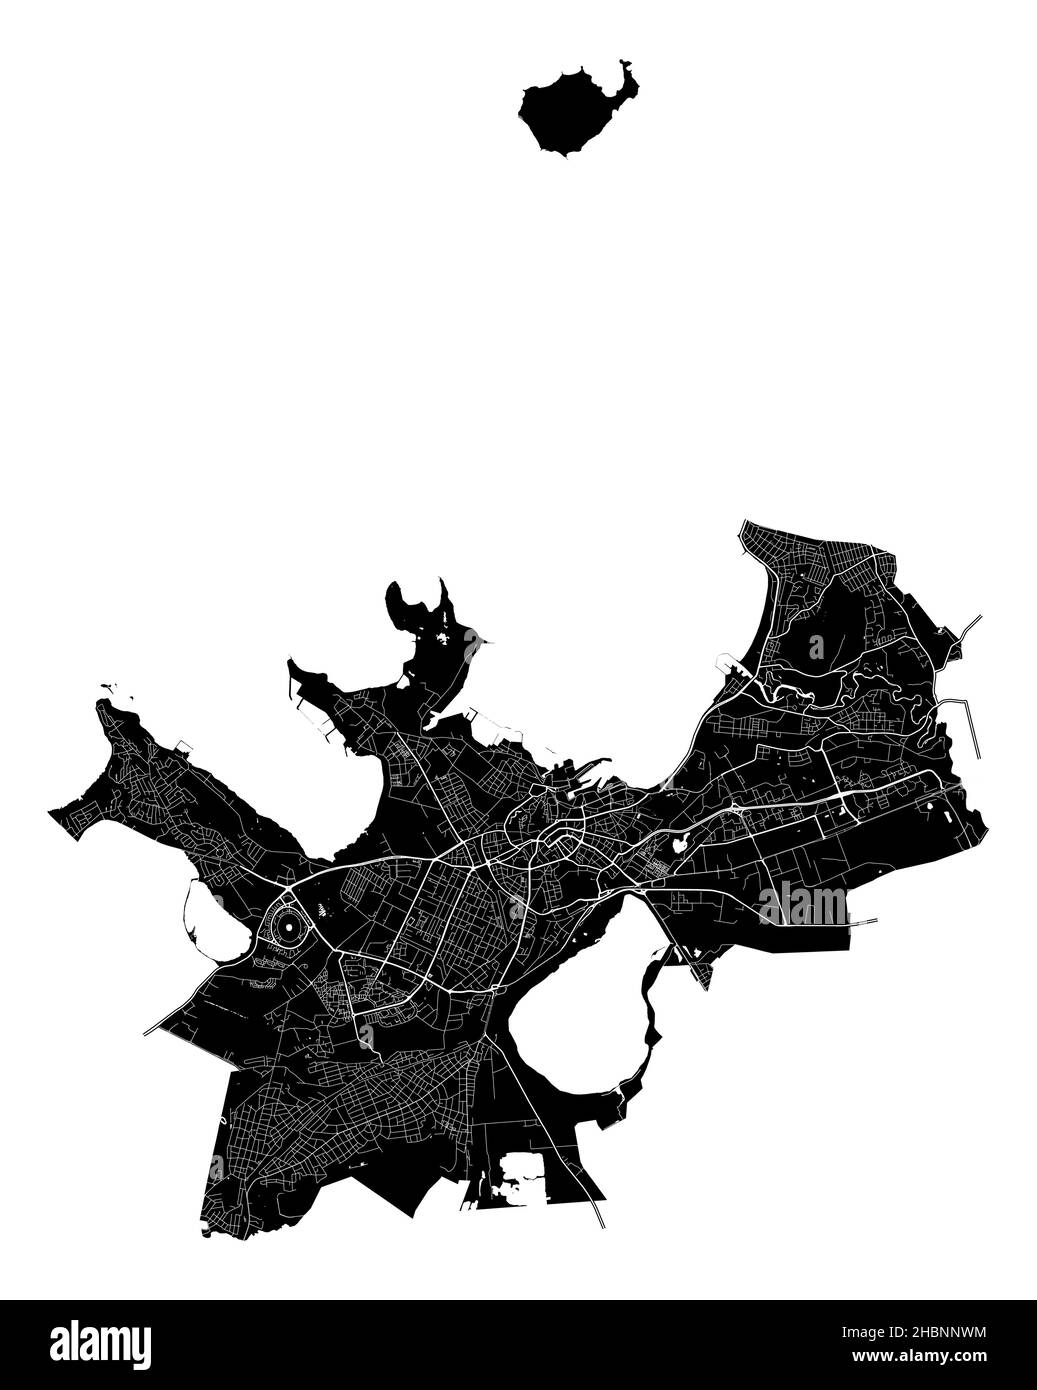 Tallinn, Estonia, high resolution vector map with city boundaries, and editable paths. The city map was drawn with white areas and lines for main road Stock Vector